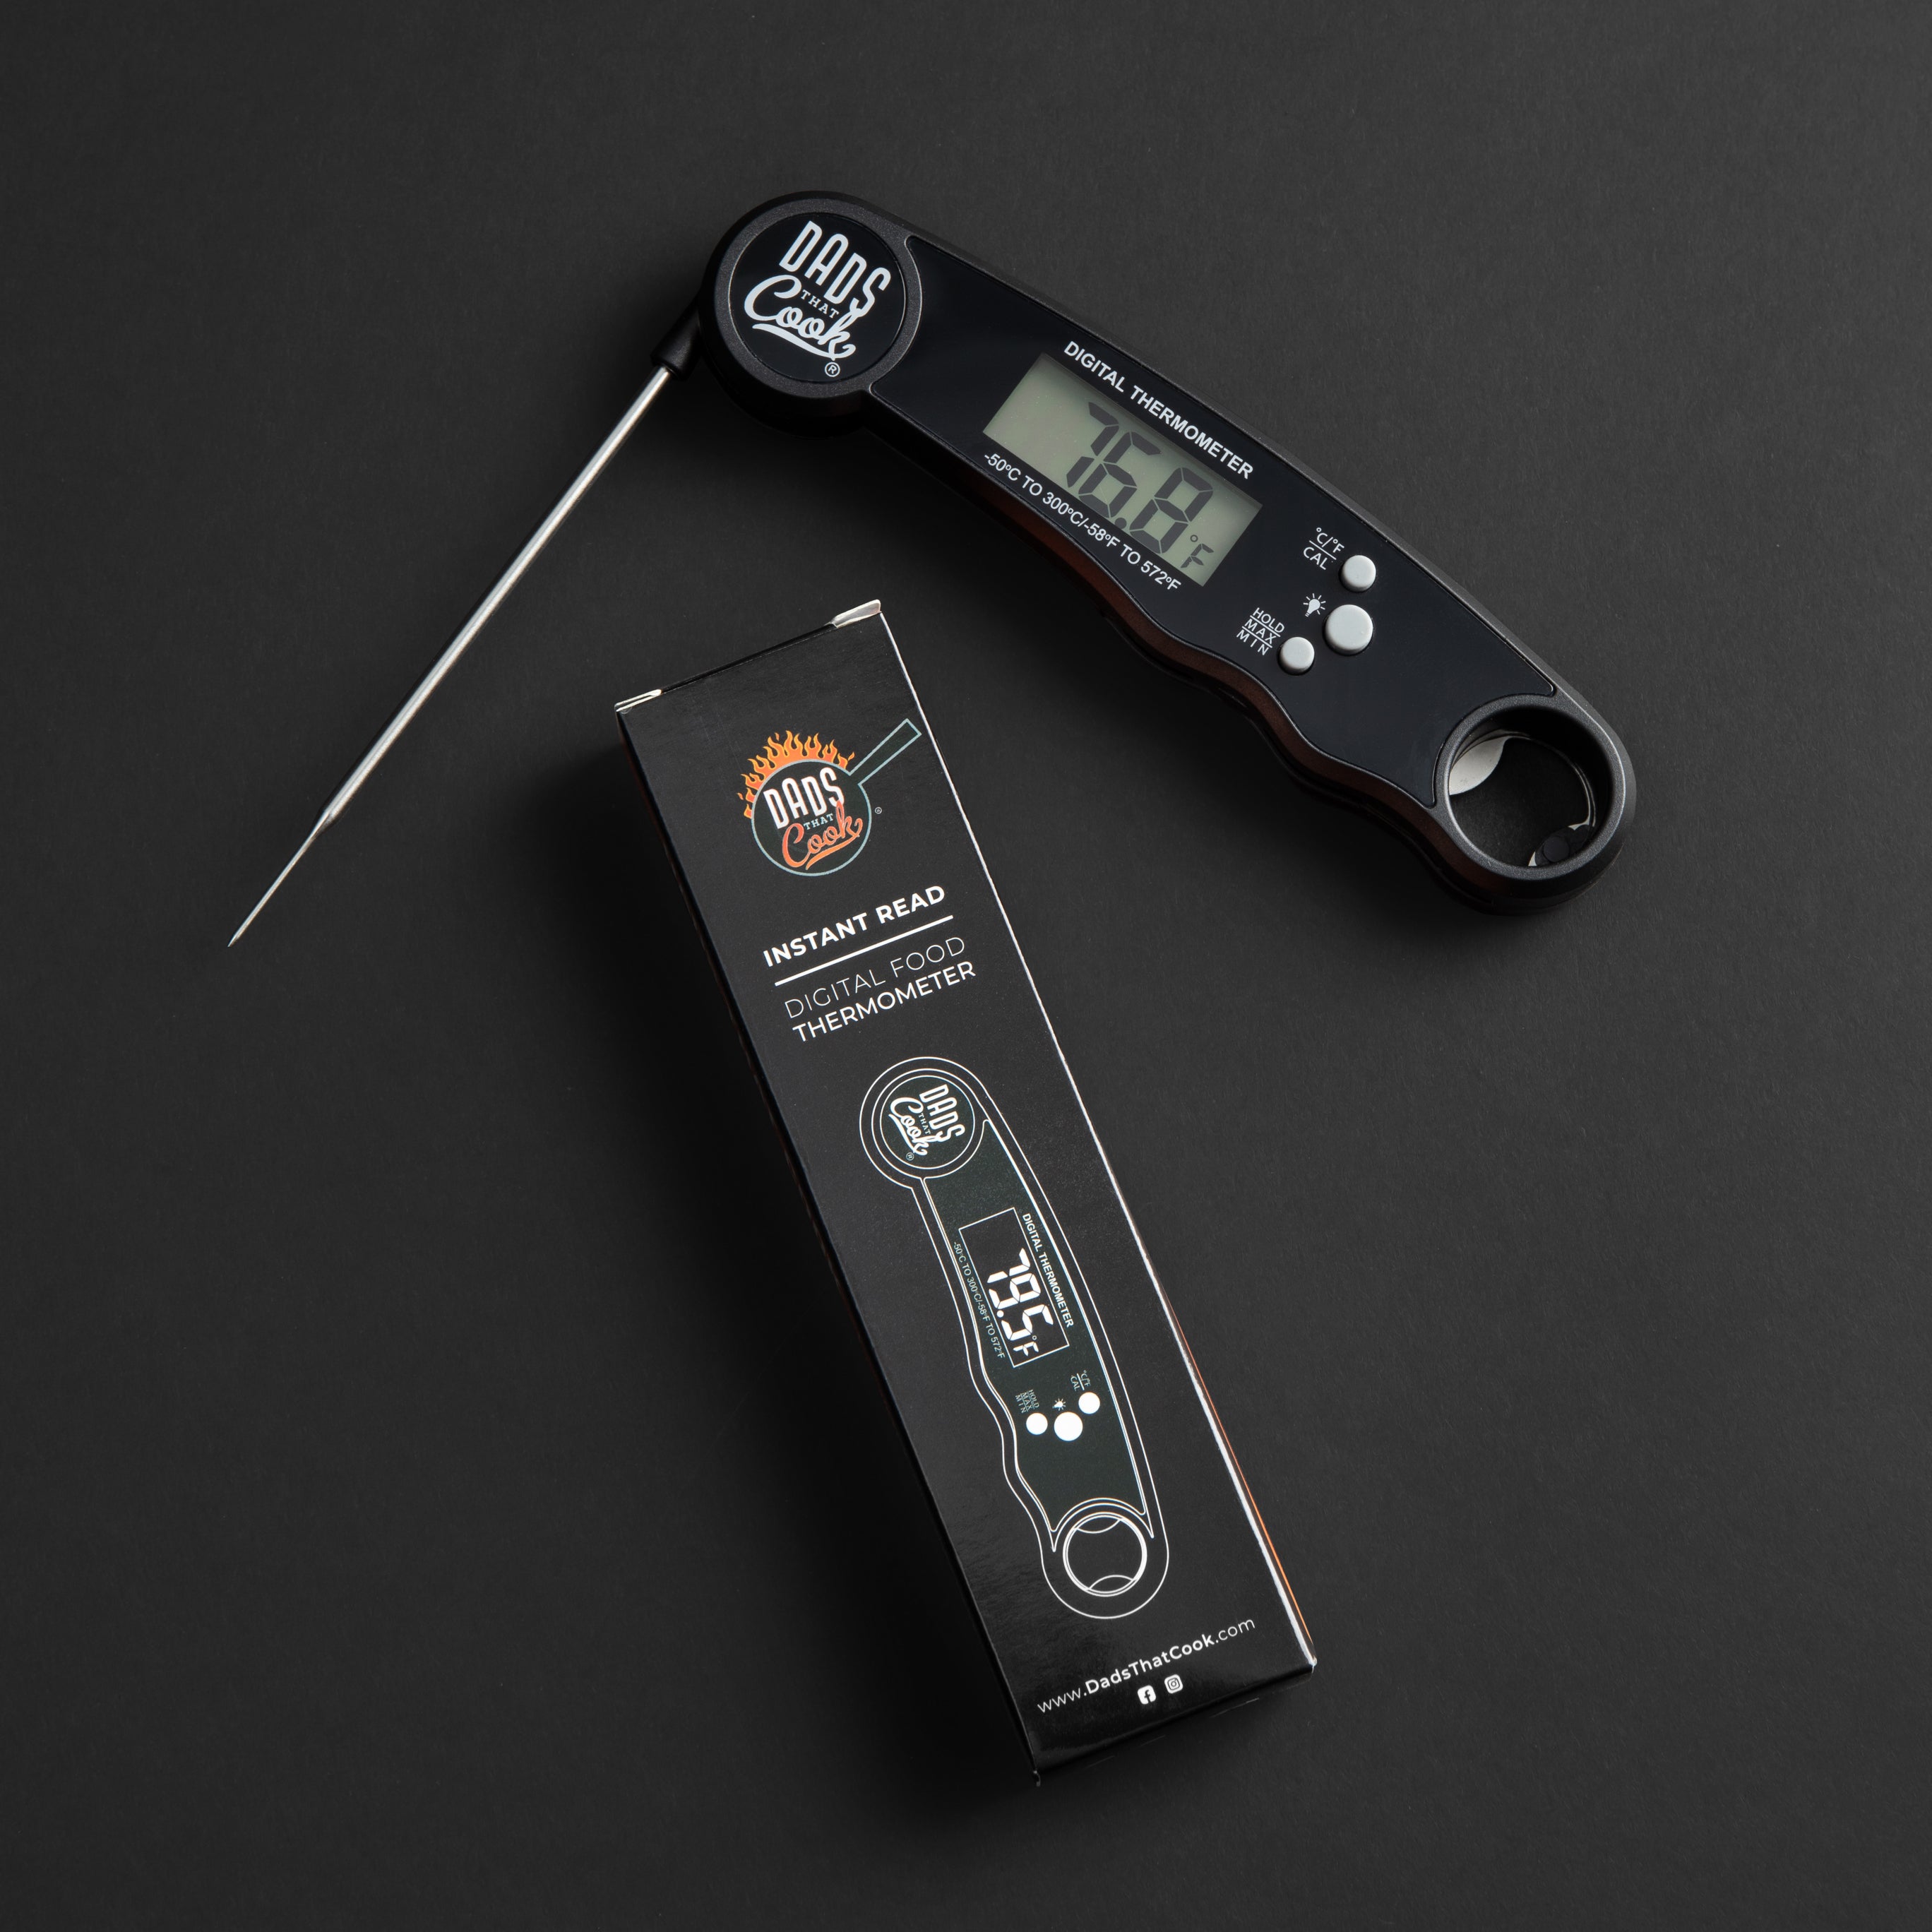 Genkent Instant Read Digital Meat Thermometer & Reviews